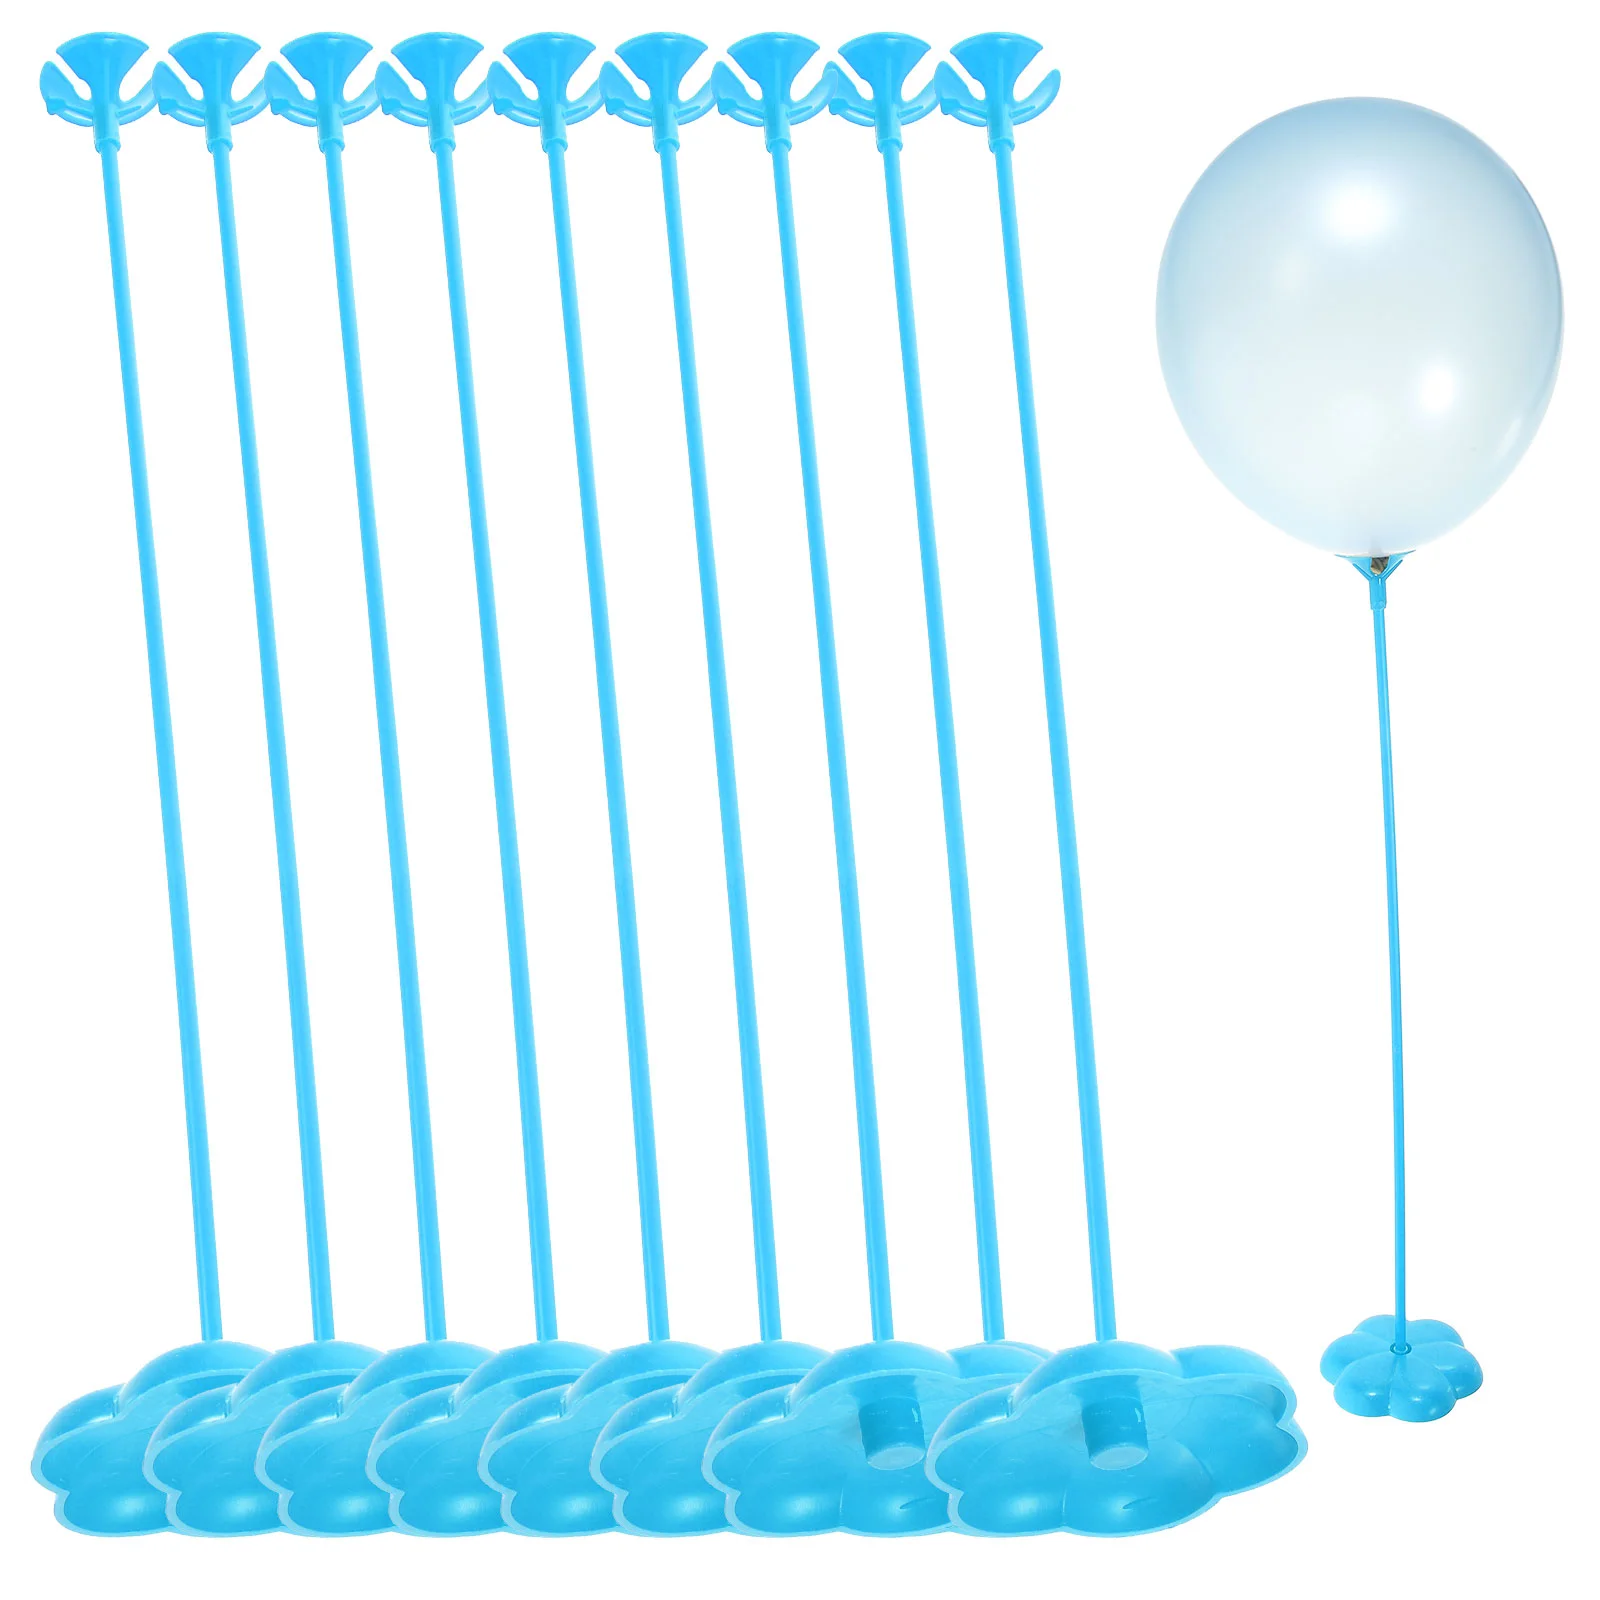 

50 Pcs Balloon Base Sticks Wedding Holder Table Centerpiece Stands for Centerpieces with Holders DIY Plastic Banquet Kit